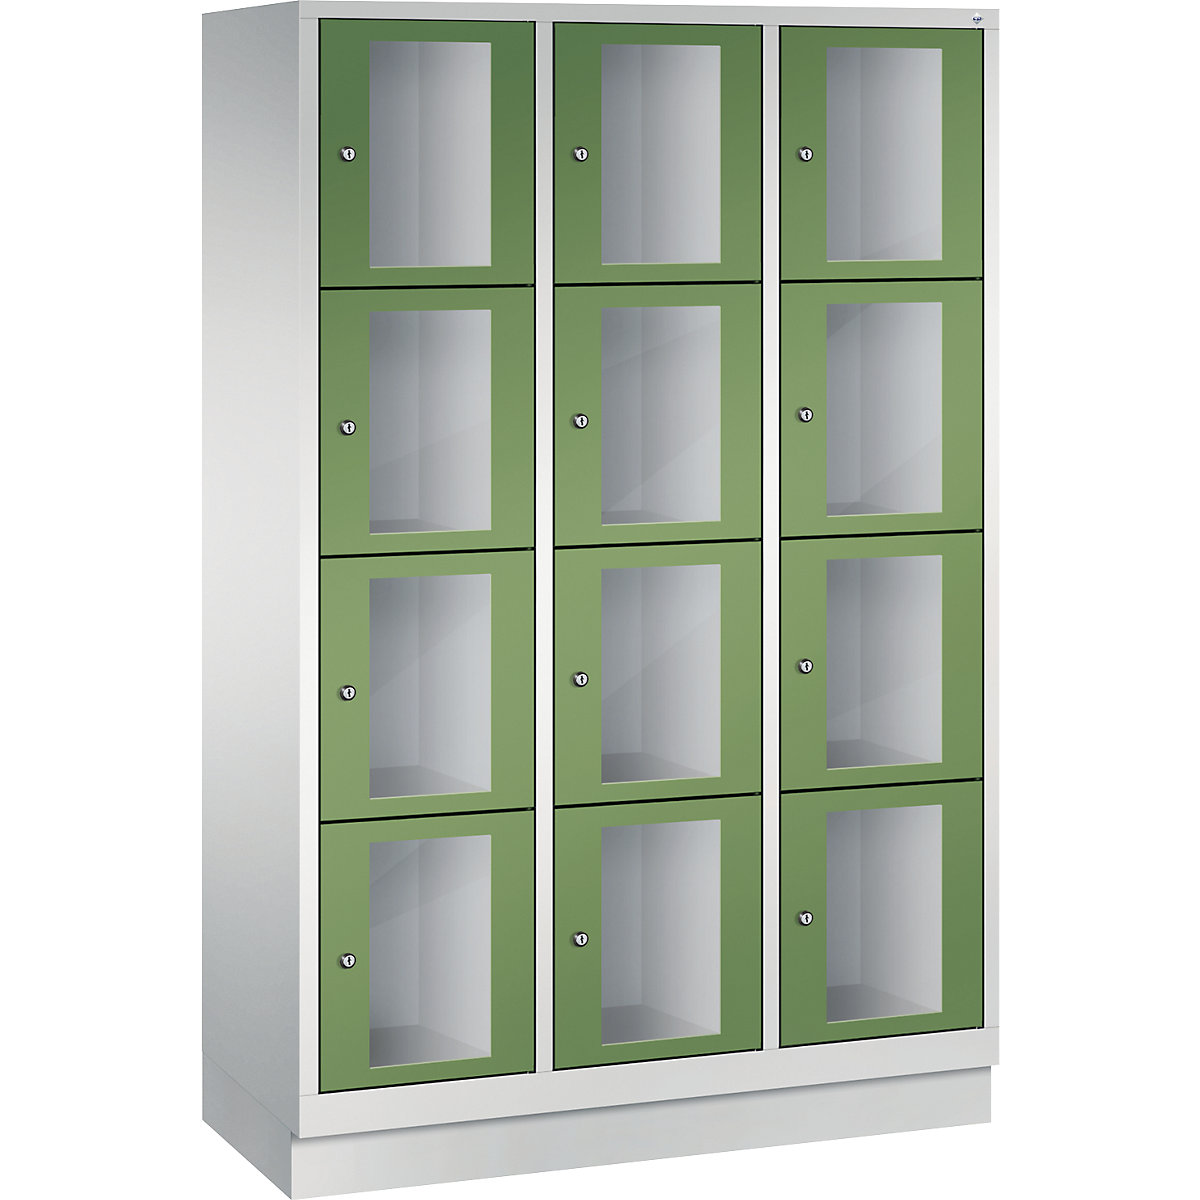 C+P – CLASSIC locker unit, compartment height 375 mm, with plinth, 12 compartments, width 1200 mm, reseda green door